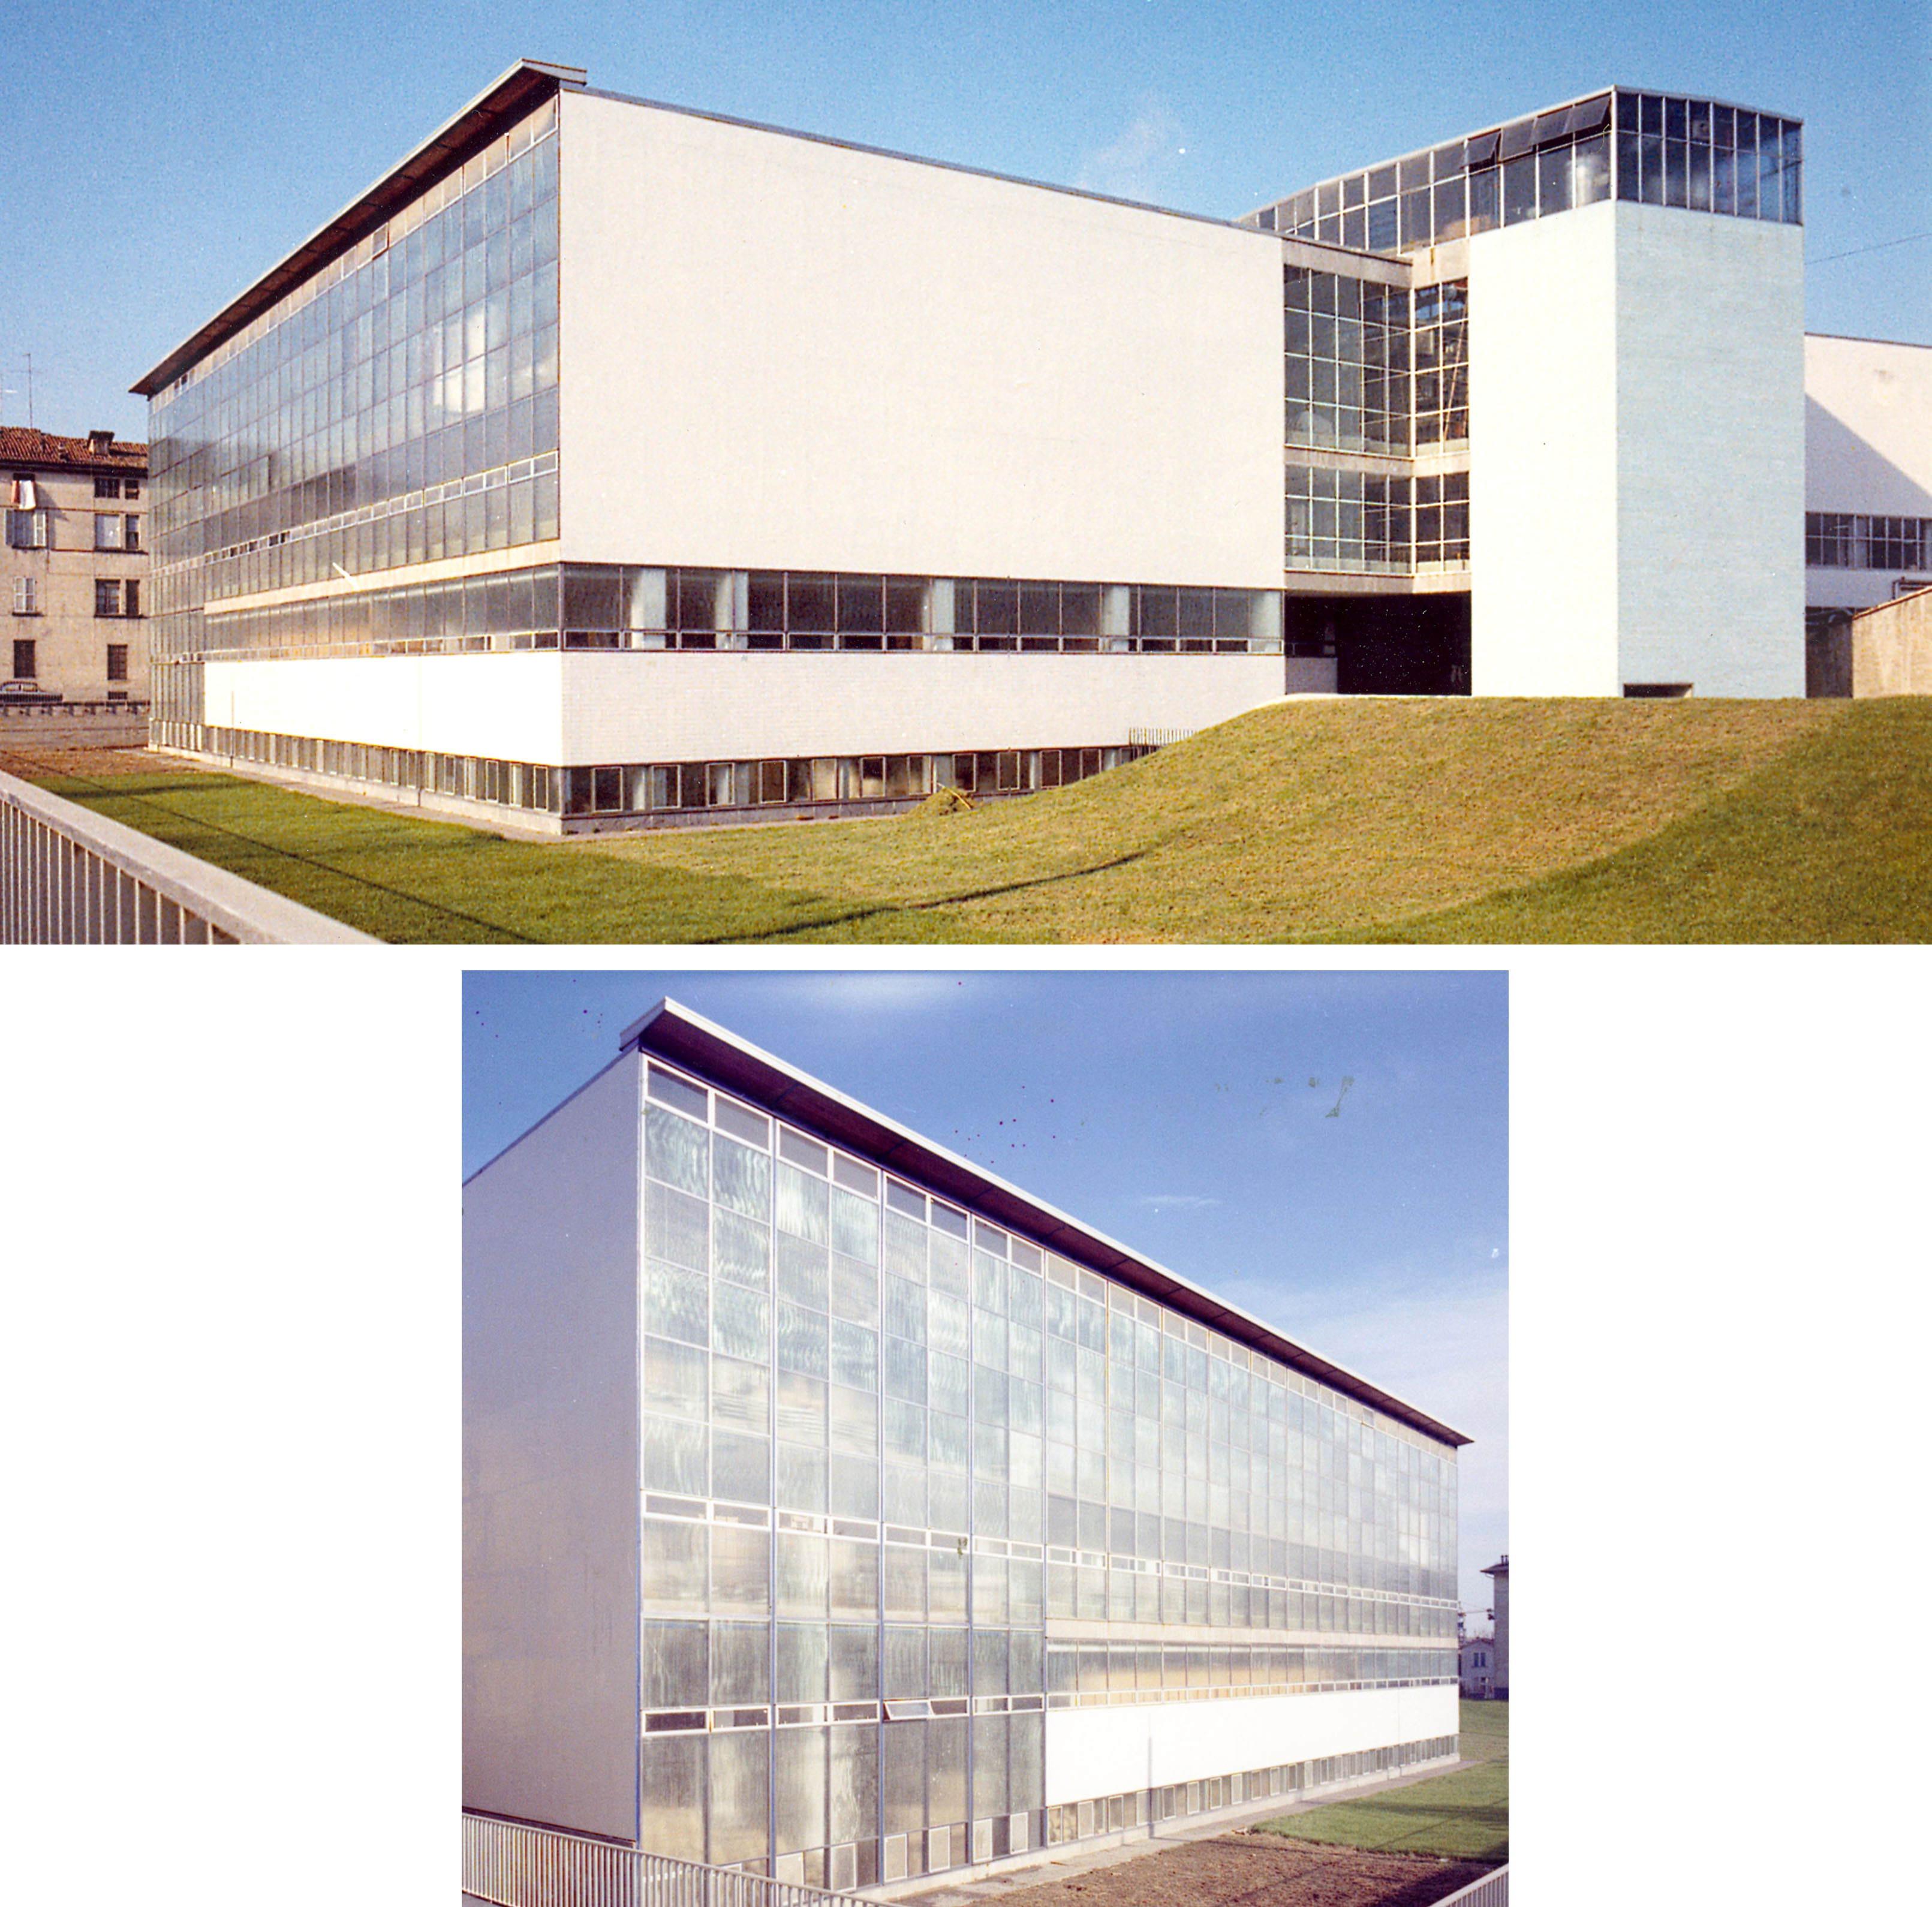 The design of the southern facade of Barilla plant shows unexpected precision in terms of composition, hiding in the corners the weight of the materials that wrap the volumes (glass and white and blue tiles). Two photos by Bruno Vaghi of the newly built p